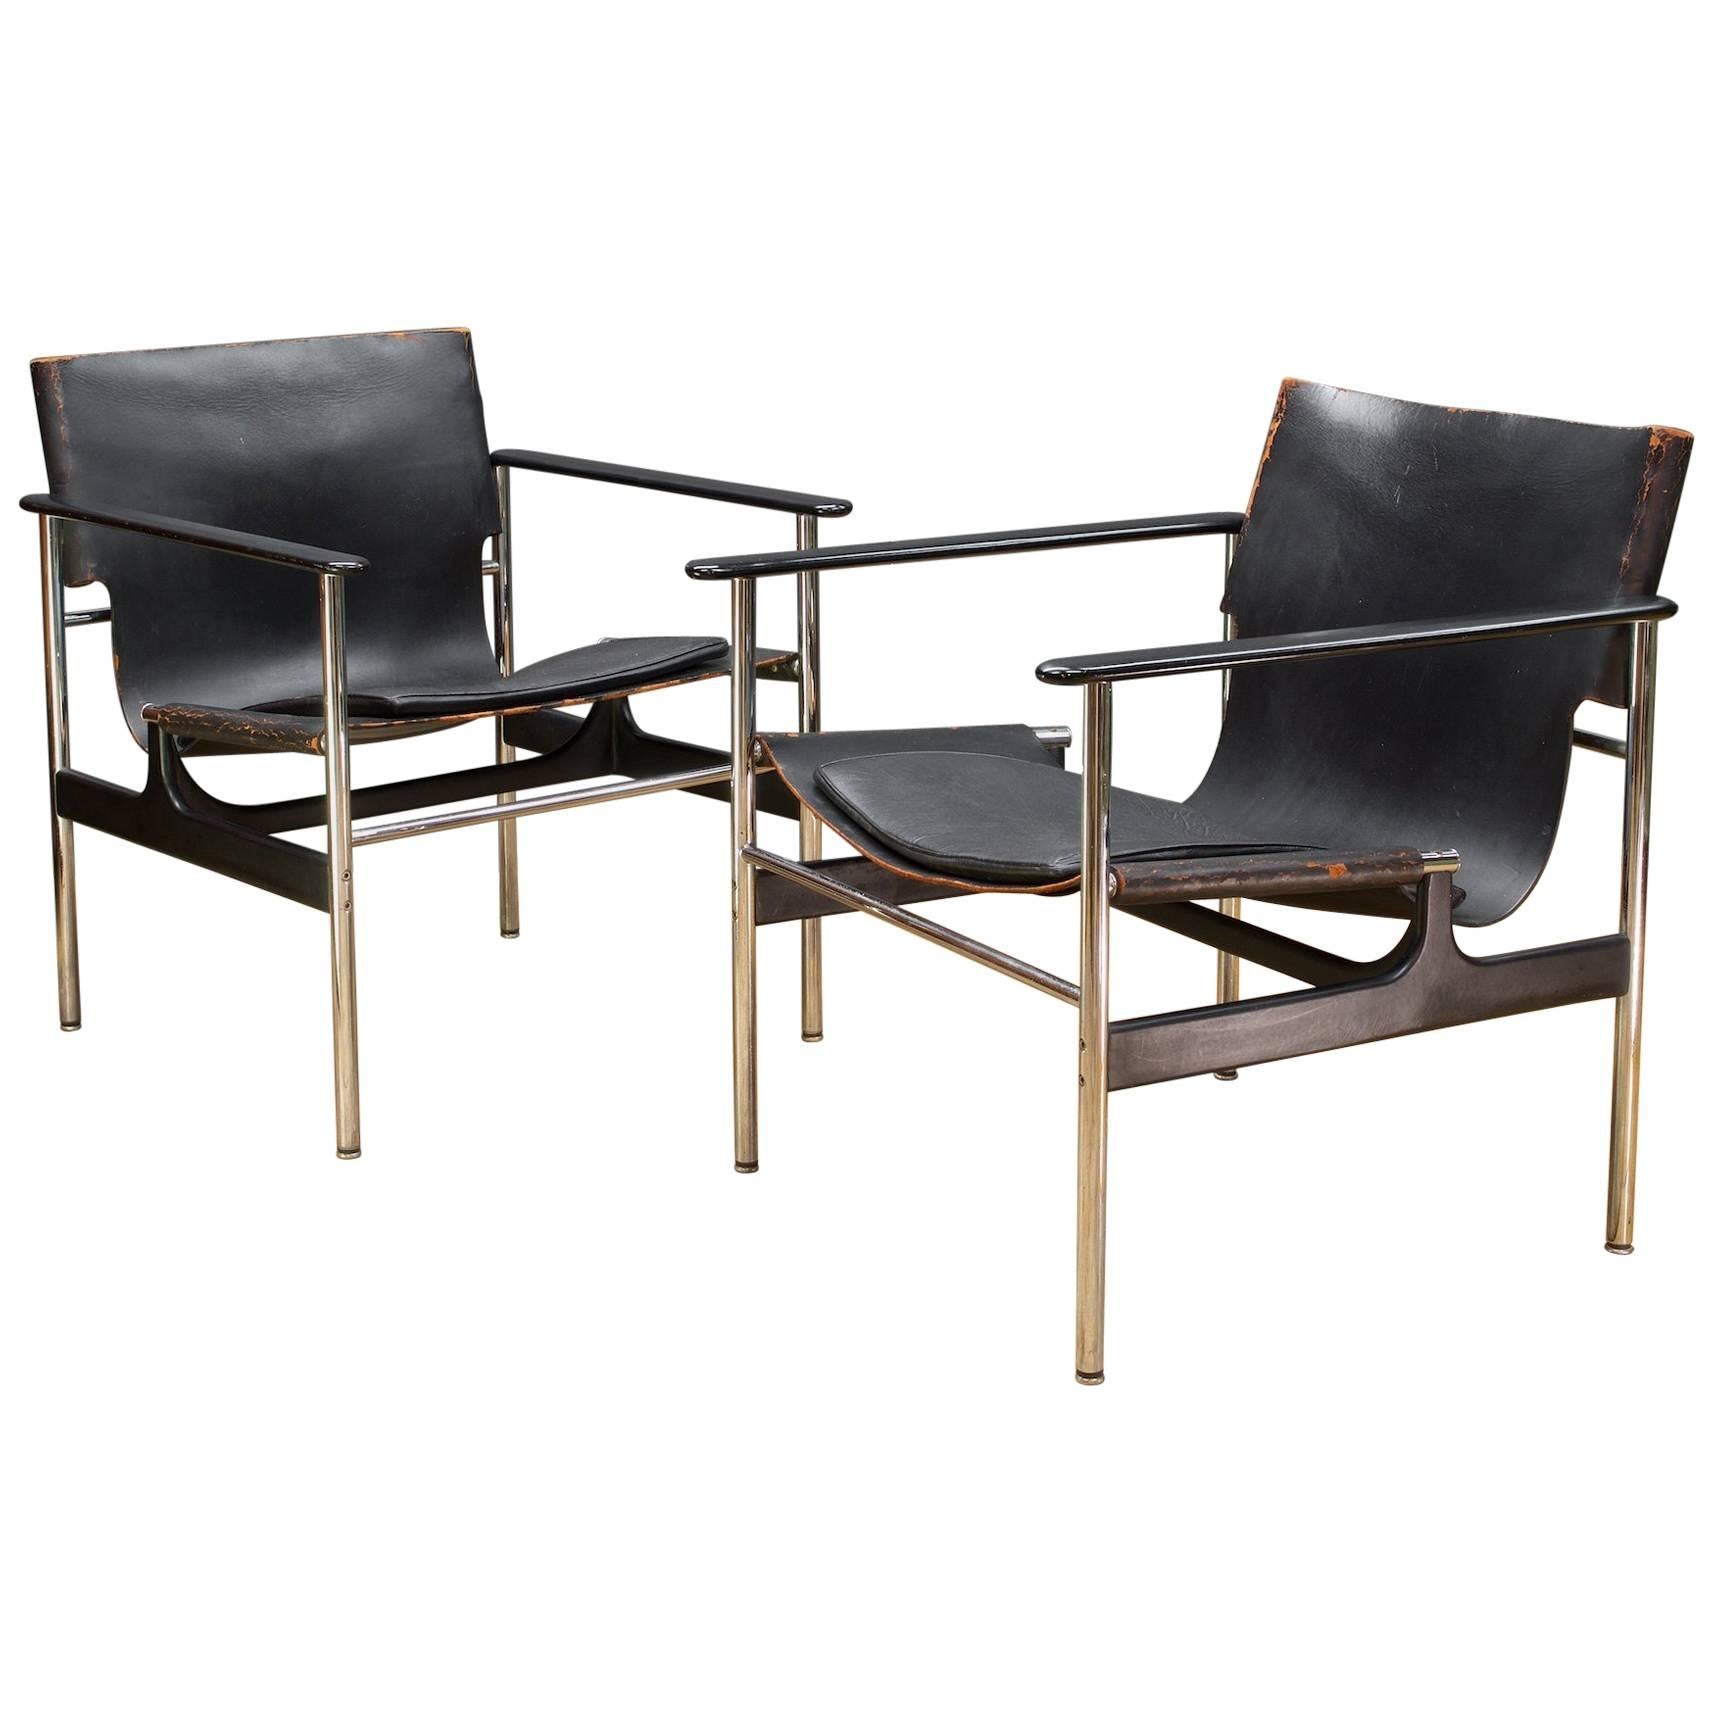 Pair of Black Leather Chrome Sling Chairs by Charles Pollack Knoll Associates